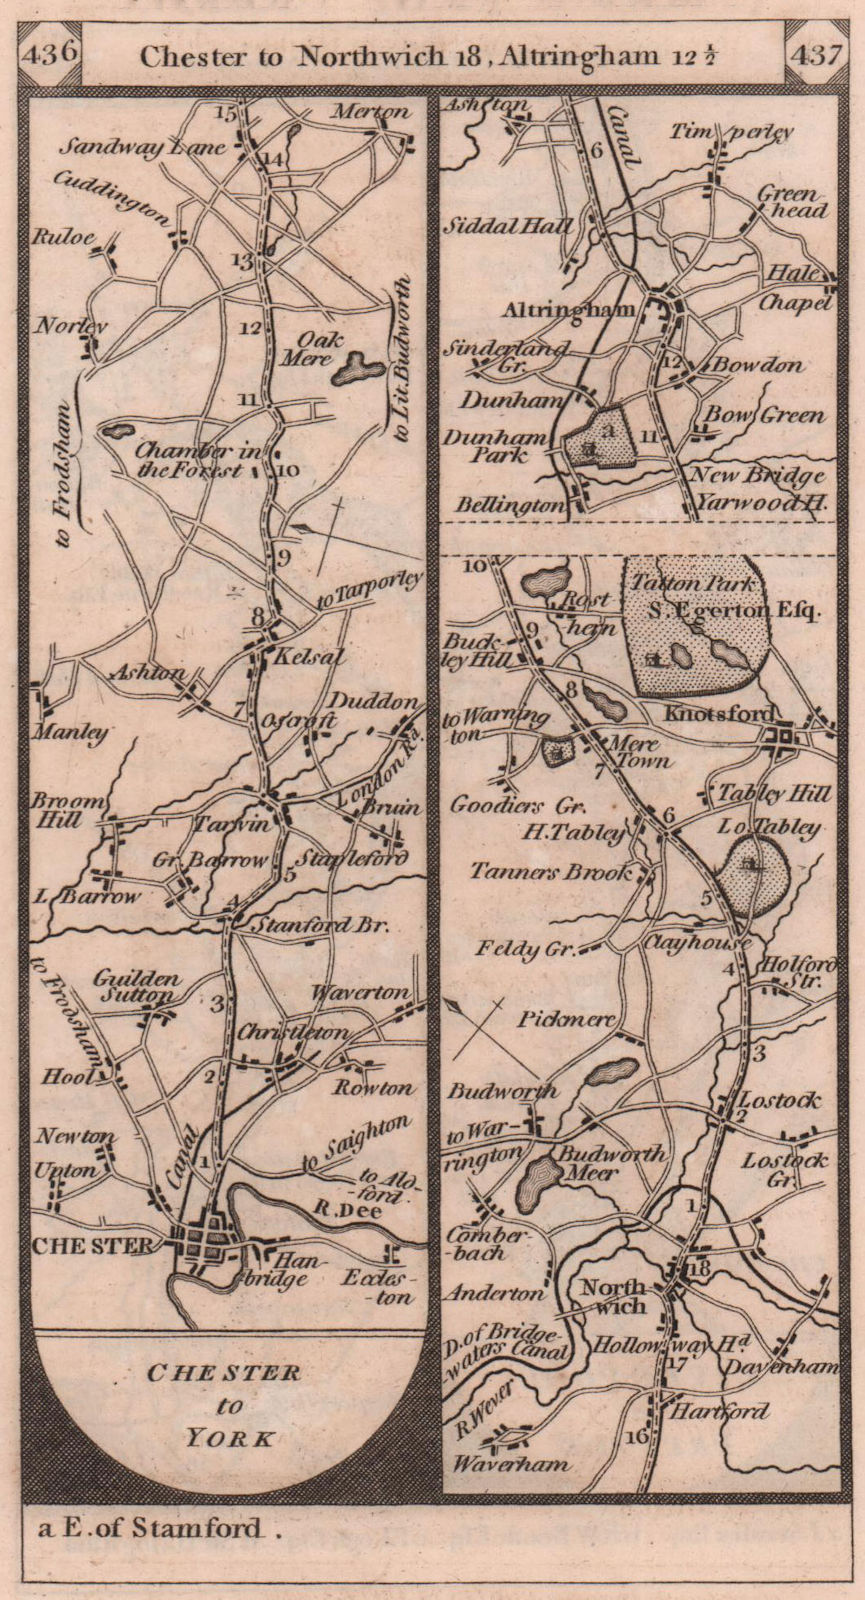 Associate Product Chester - Northwich - Knutsford - Altrincham road strip map PATERSON 1803